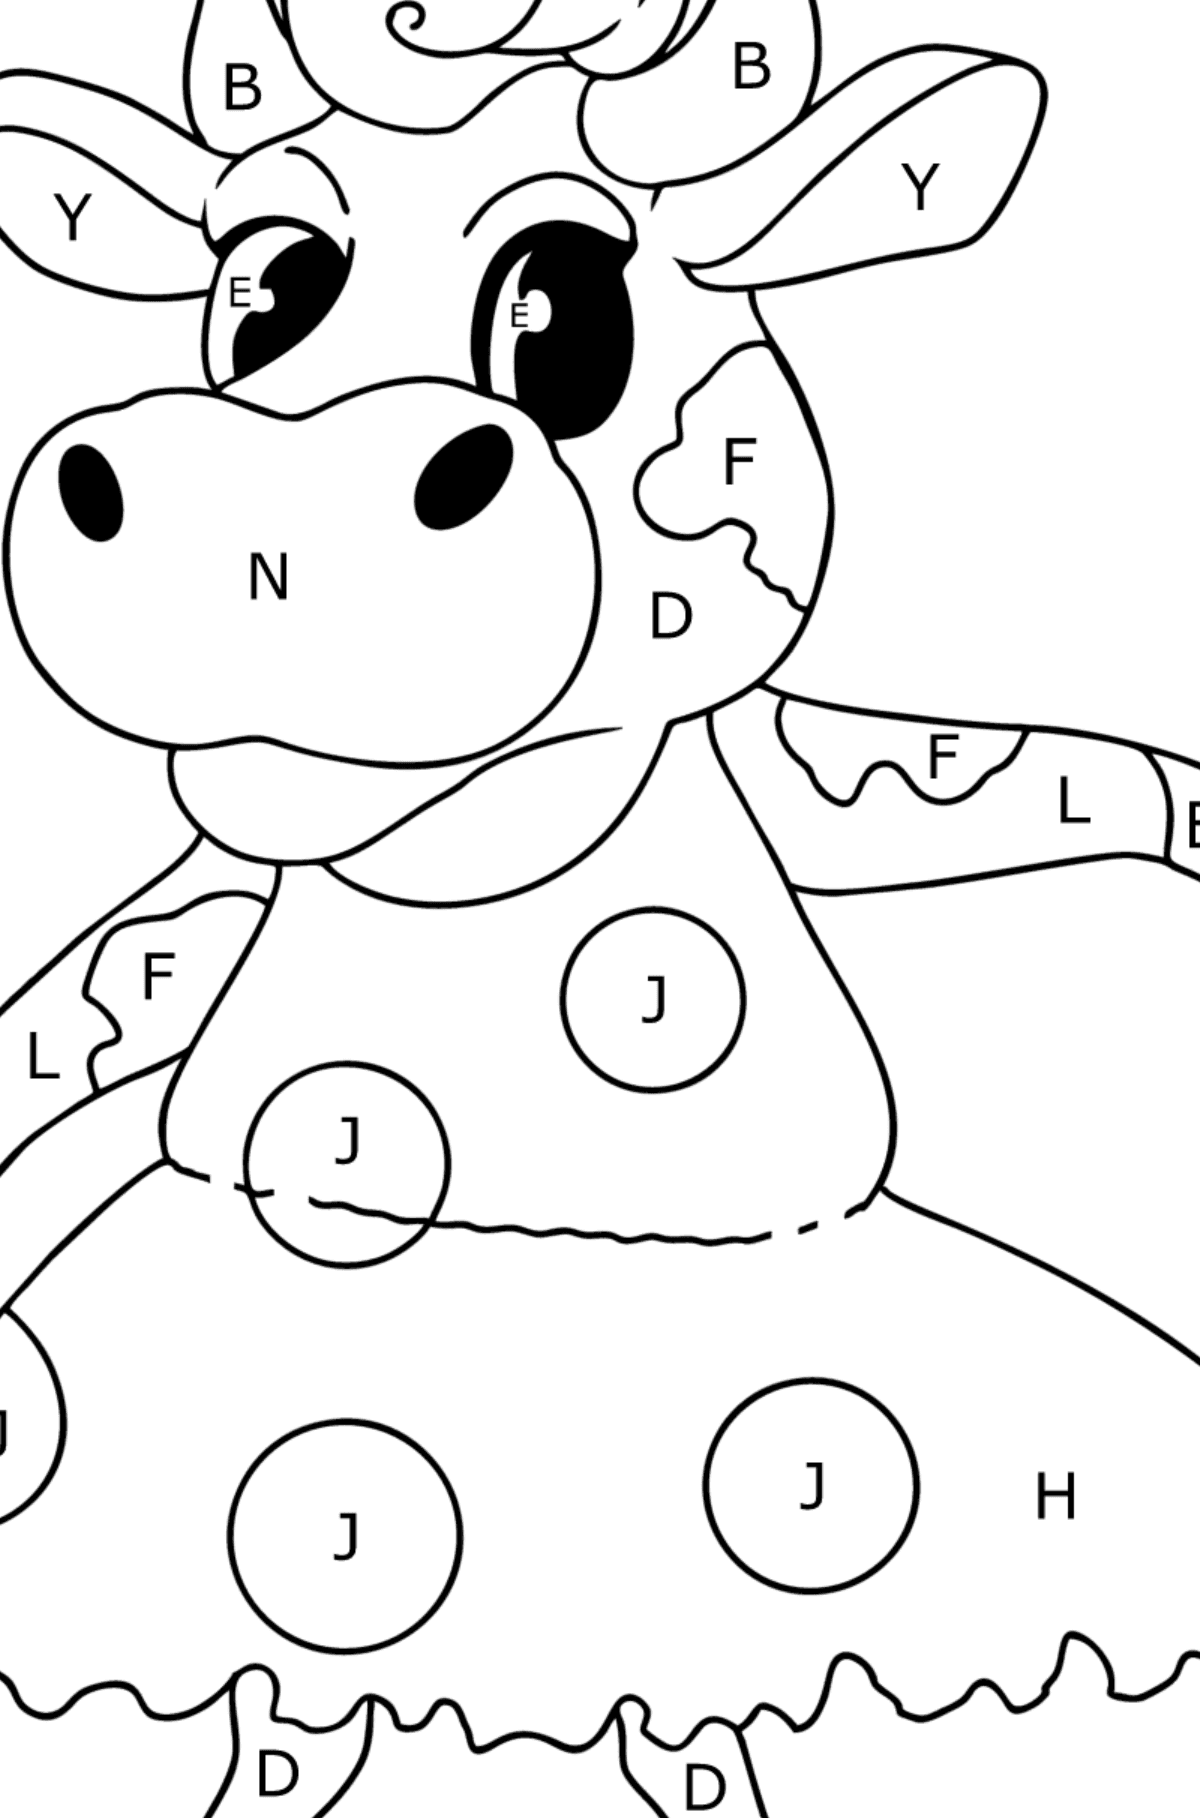 Kawaii cow standing up coloring page - Coloring by Letters for Kids